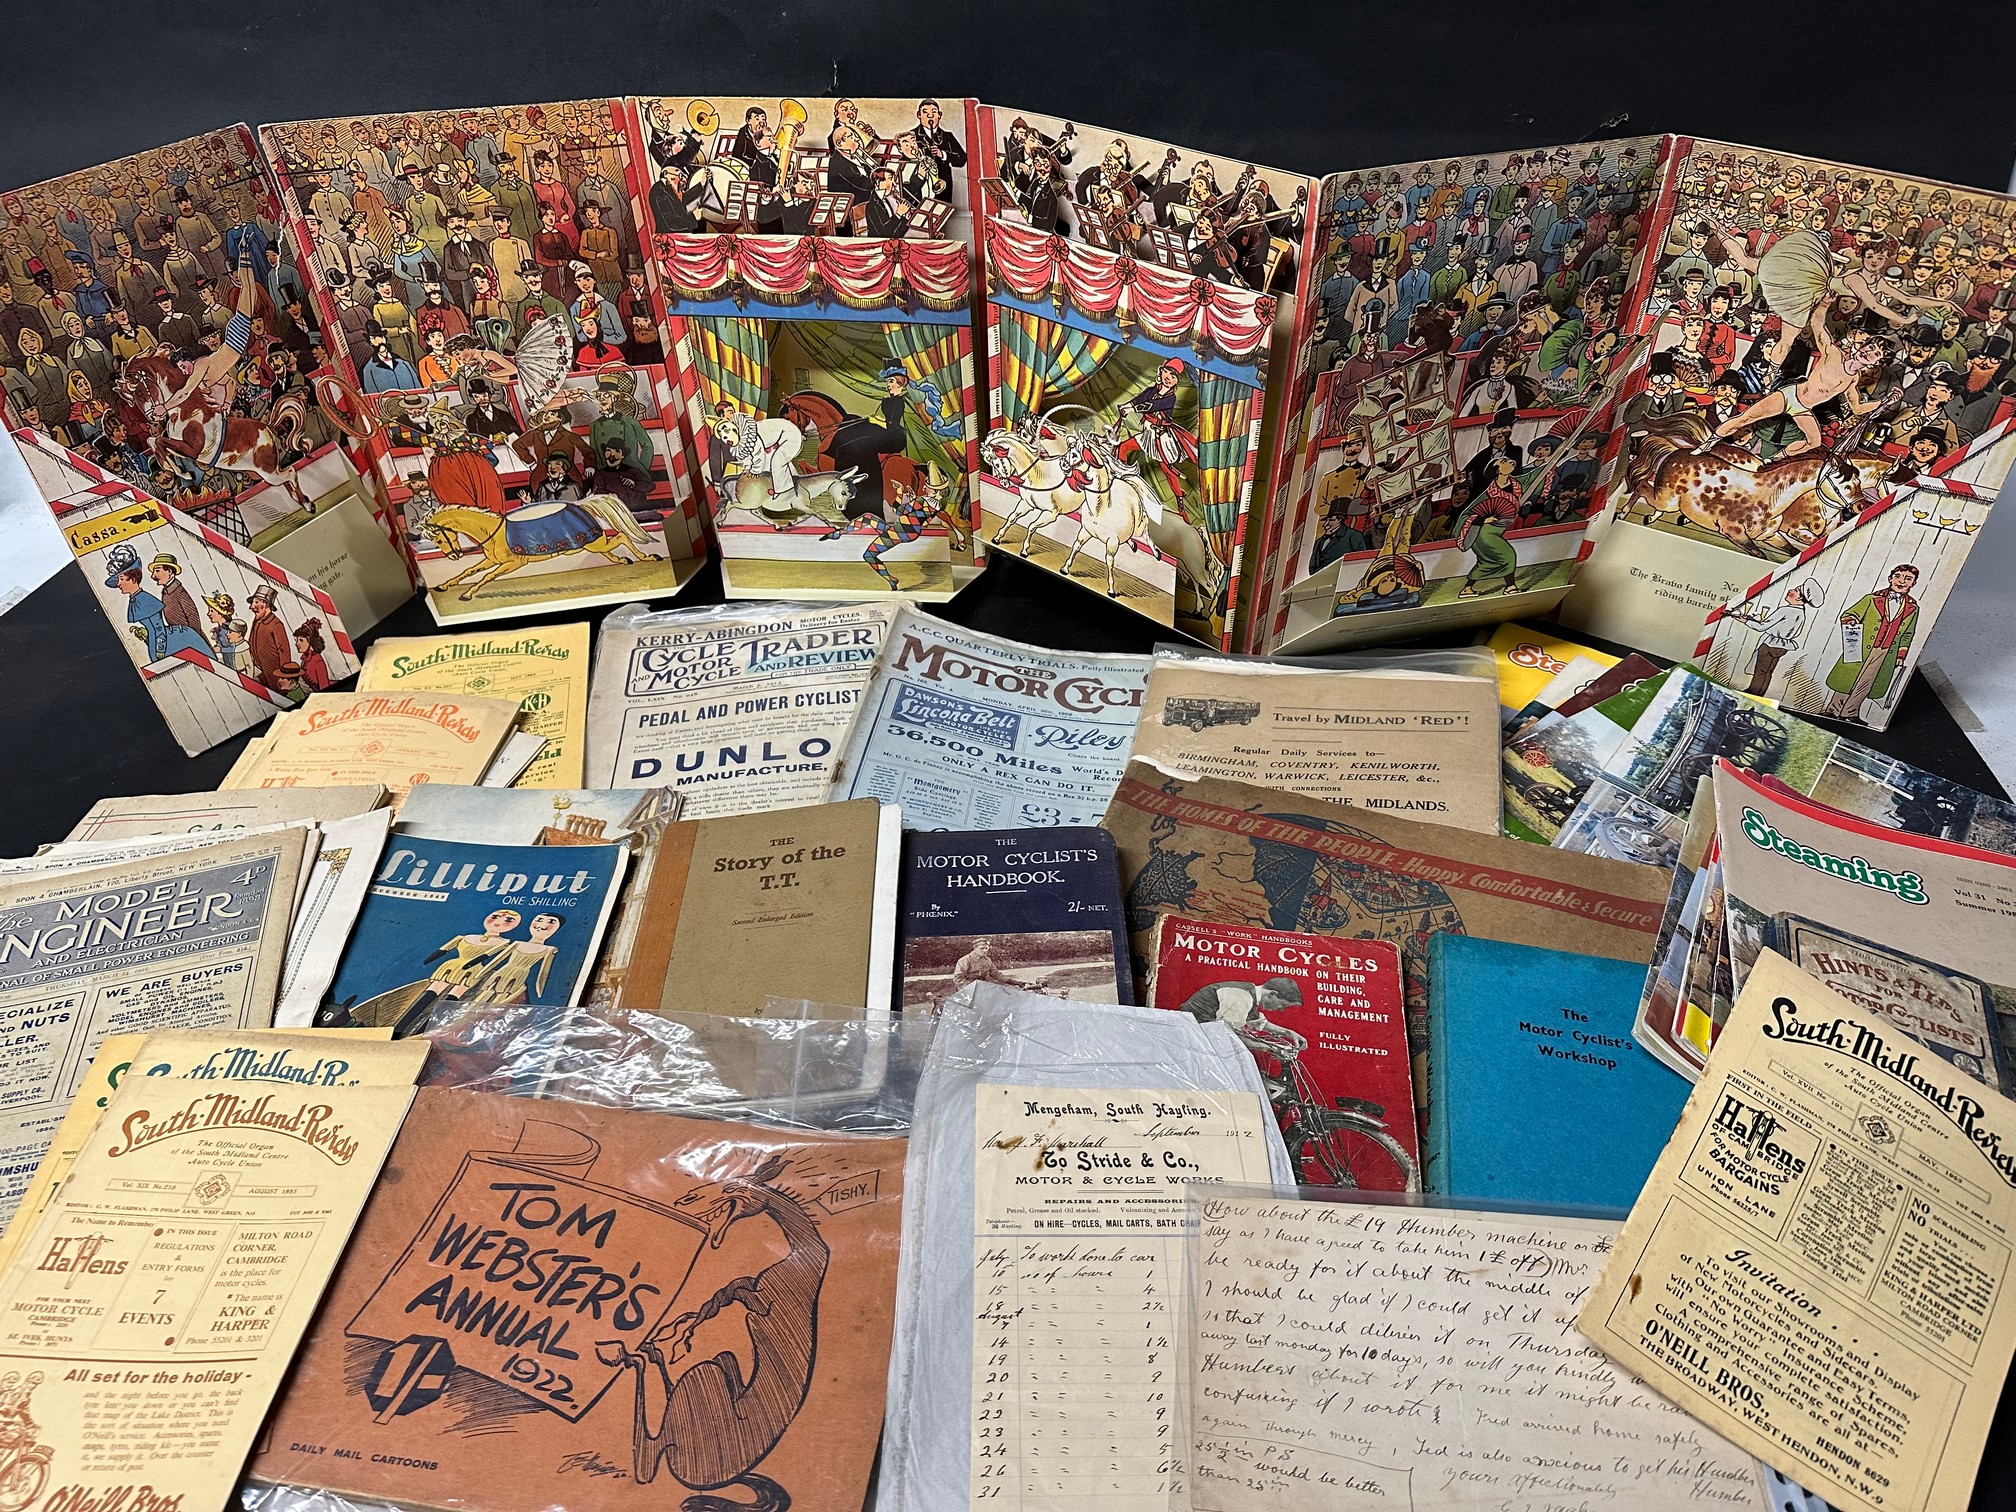 An interesting lot of books and ephemera including a Tom Webster's 1922 annual, International Circus